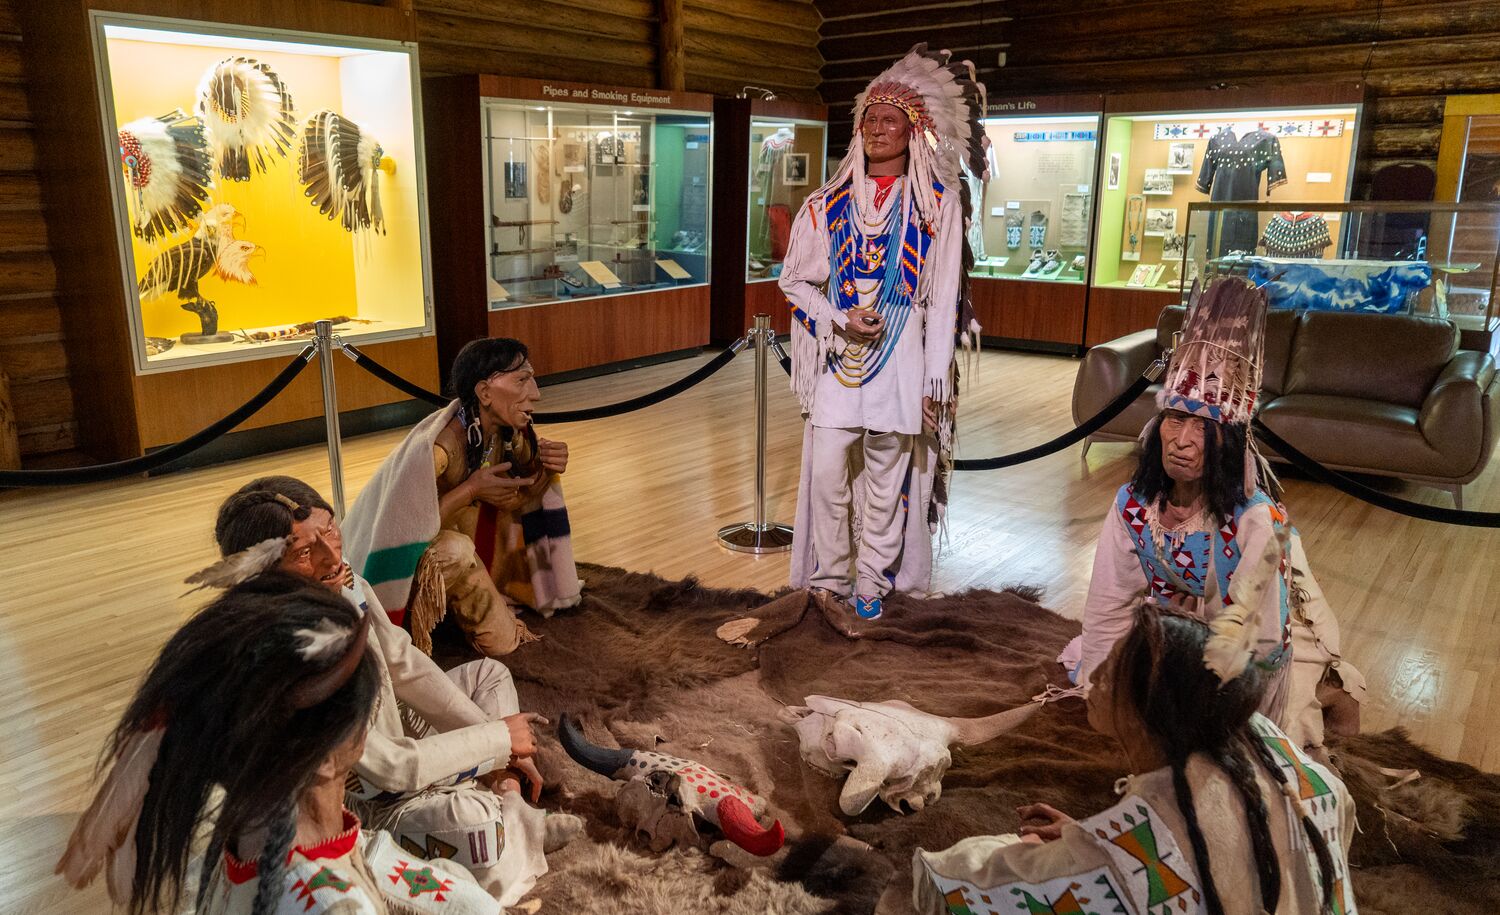 Artifacts and mannequins covered with traditional Indigenous clothing displayed at Buffalo Nations Museum in Banff National Park.